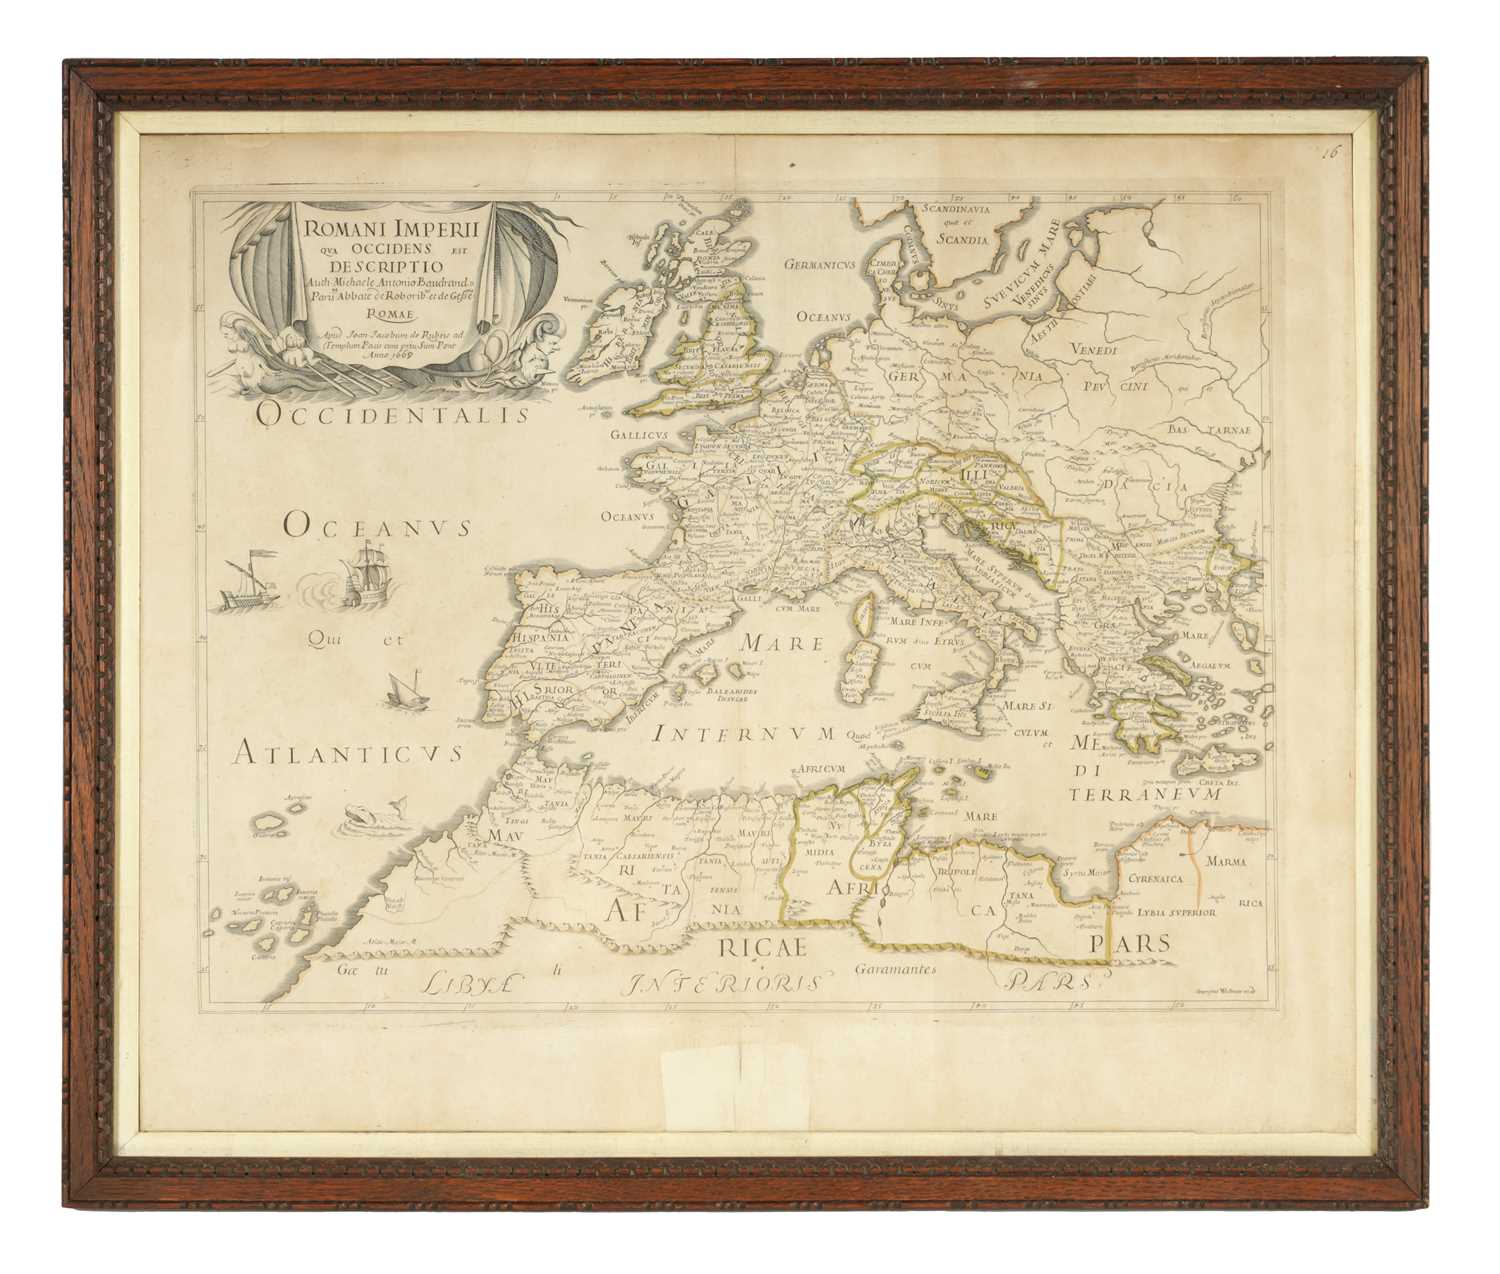 A LATE 17TH CENTURY ITALIAN MAP OF EUROPE ENTITLED ROMANI IMPERII AND DATED 1669